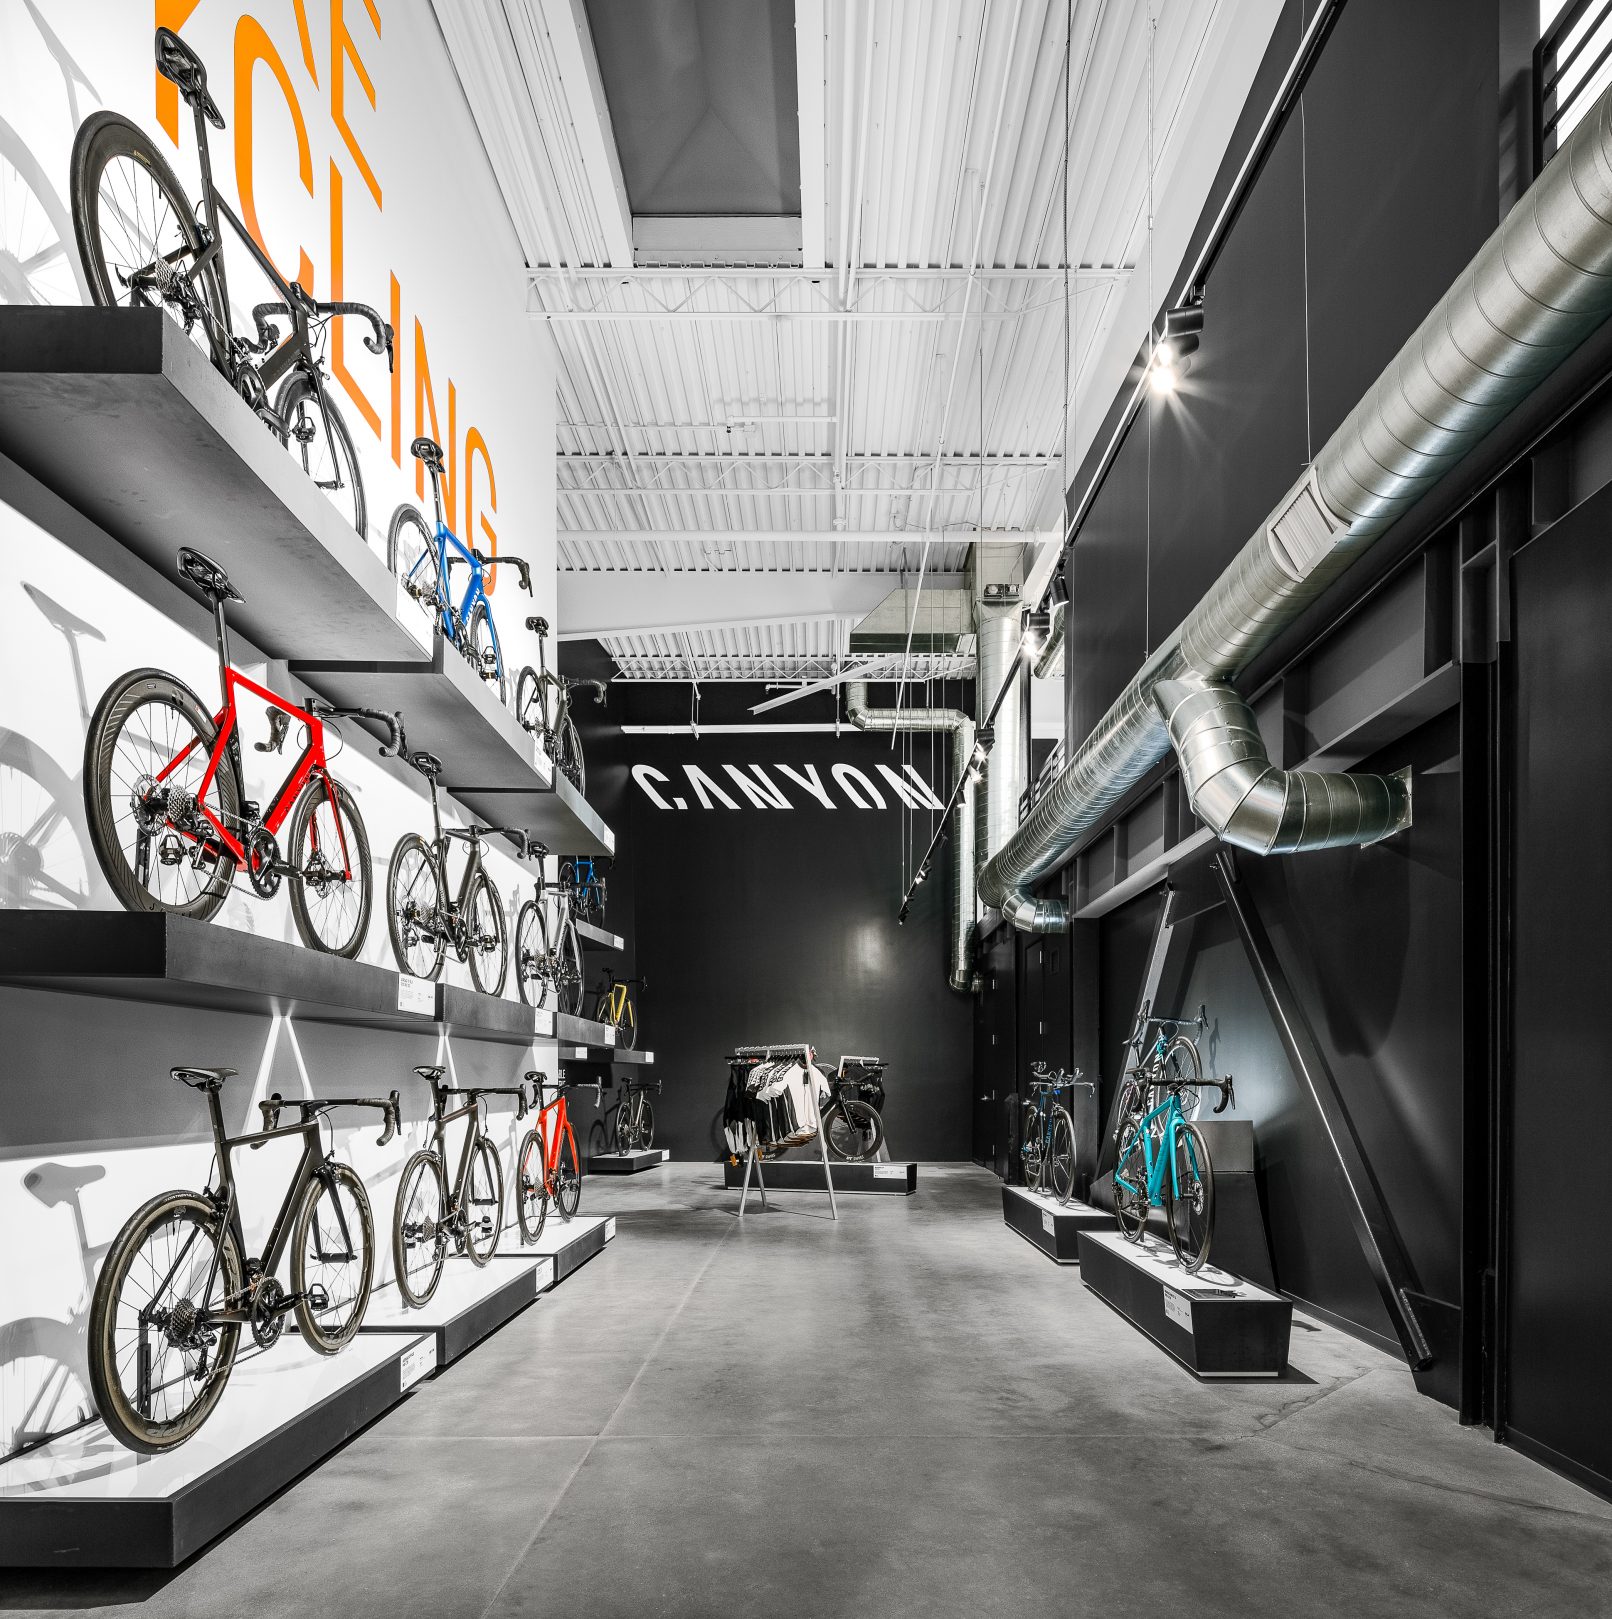 Commercial Interior Design Photography of the Canyon Bicycle Store in Carlsbad California featuring a stark black and white interior with Orange and White text on the walls and a wall of bicycles displayed on cantilevered shelves on the left and exposed ductwork on the right